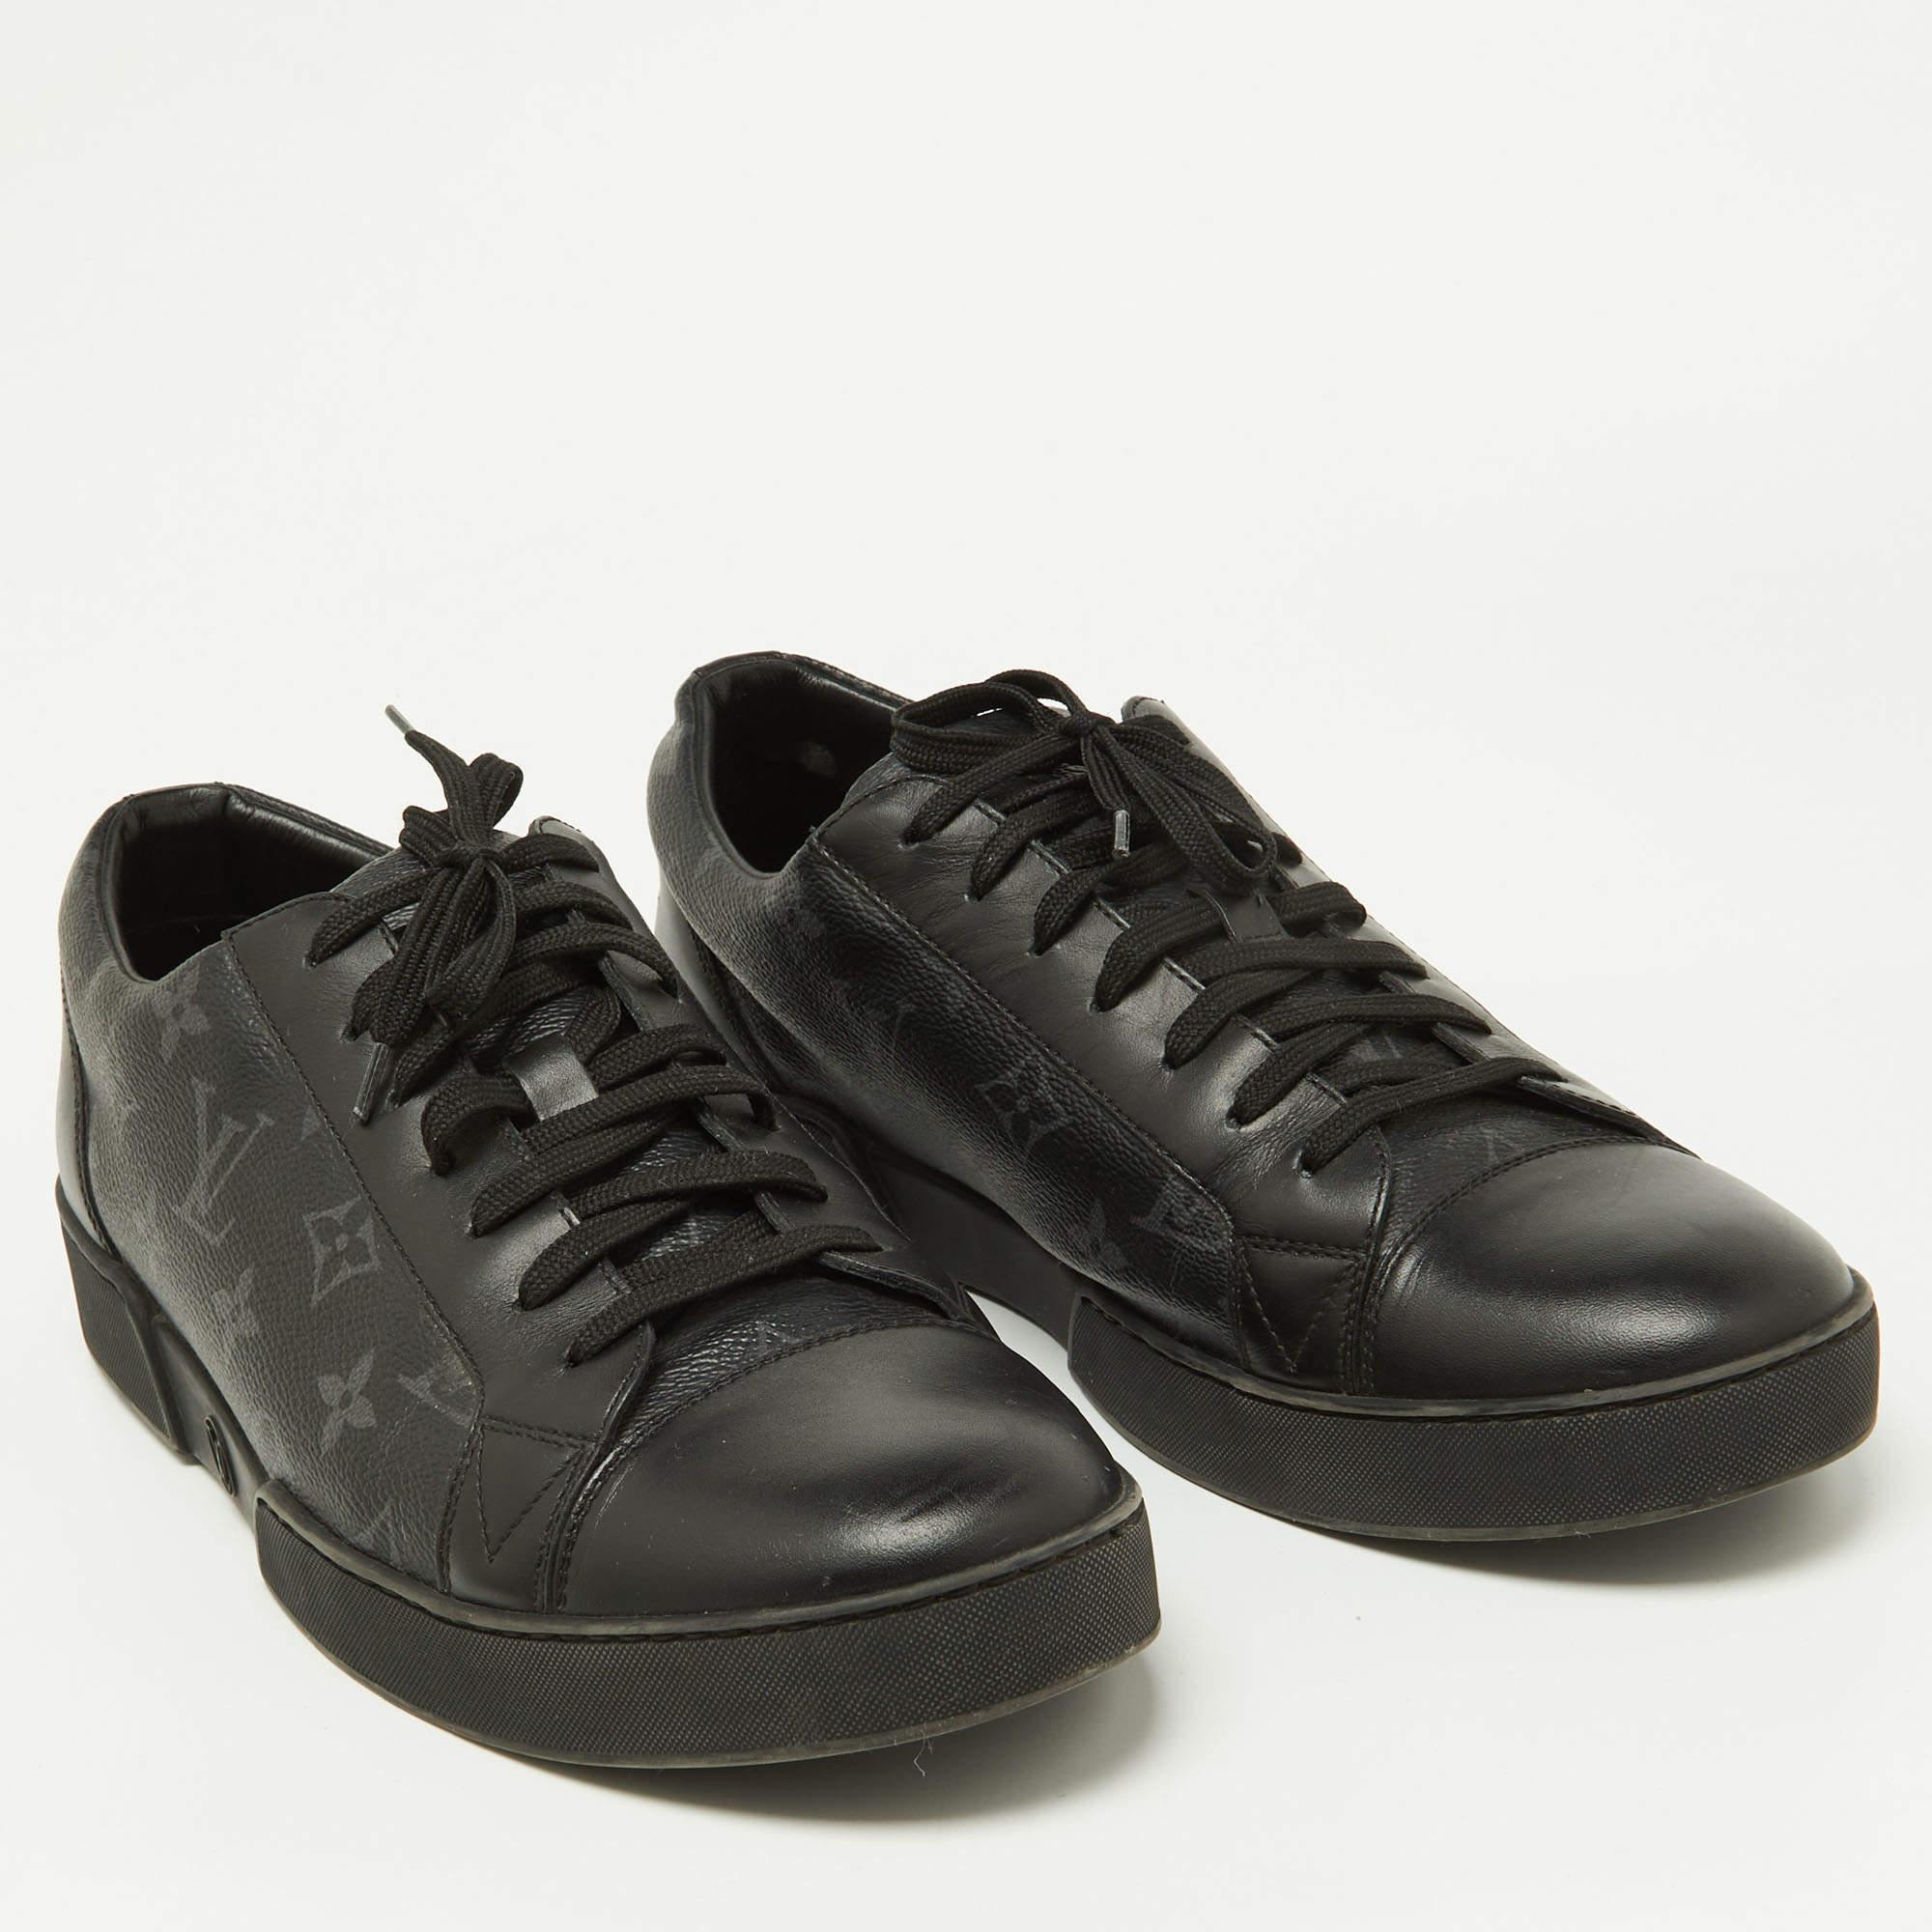 Louis Vuitton Black Leather and Monogram Eclipse Canvas Match Up Sneaker Size 42 For Sale 1